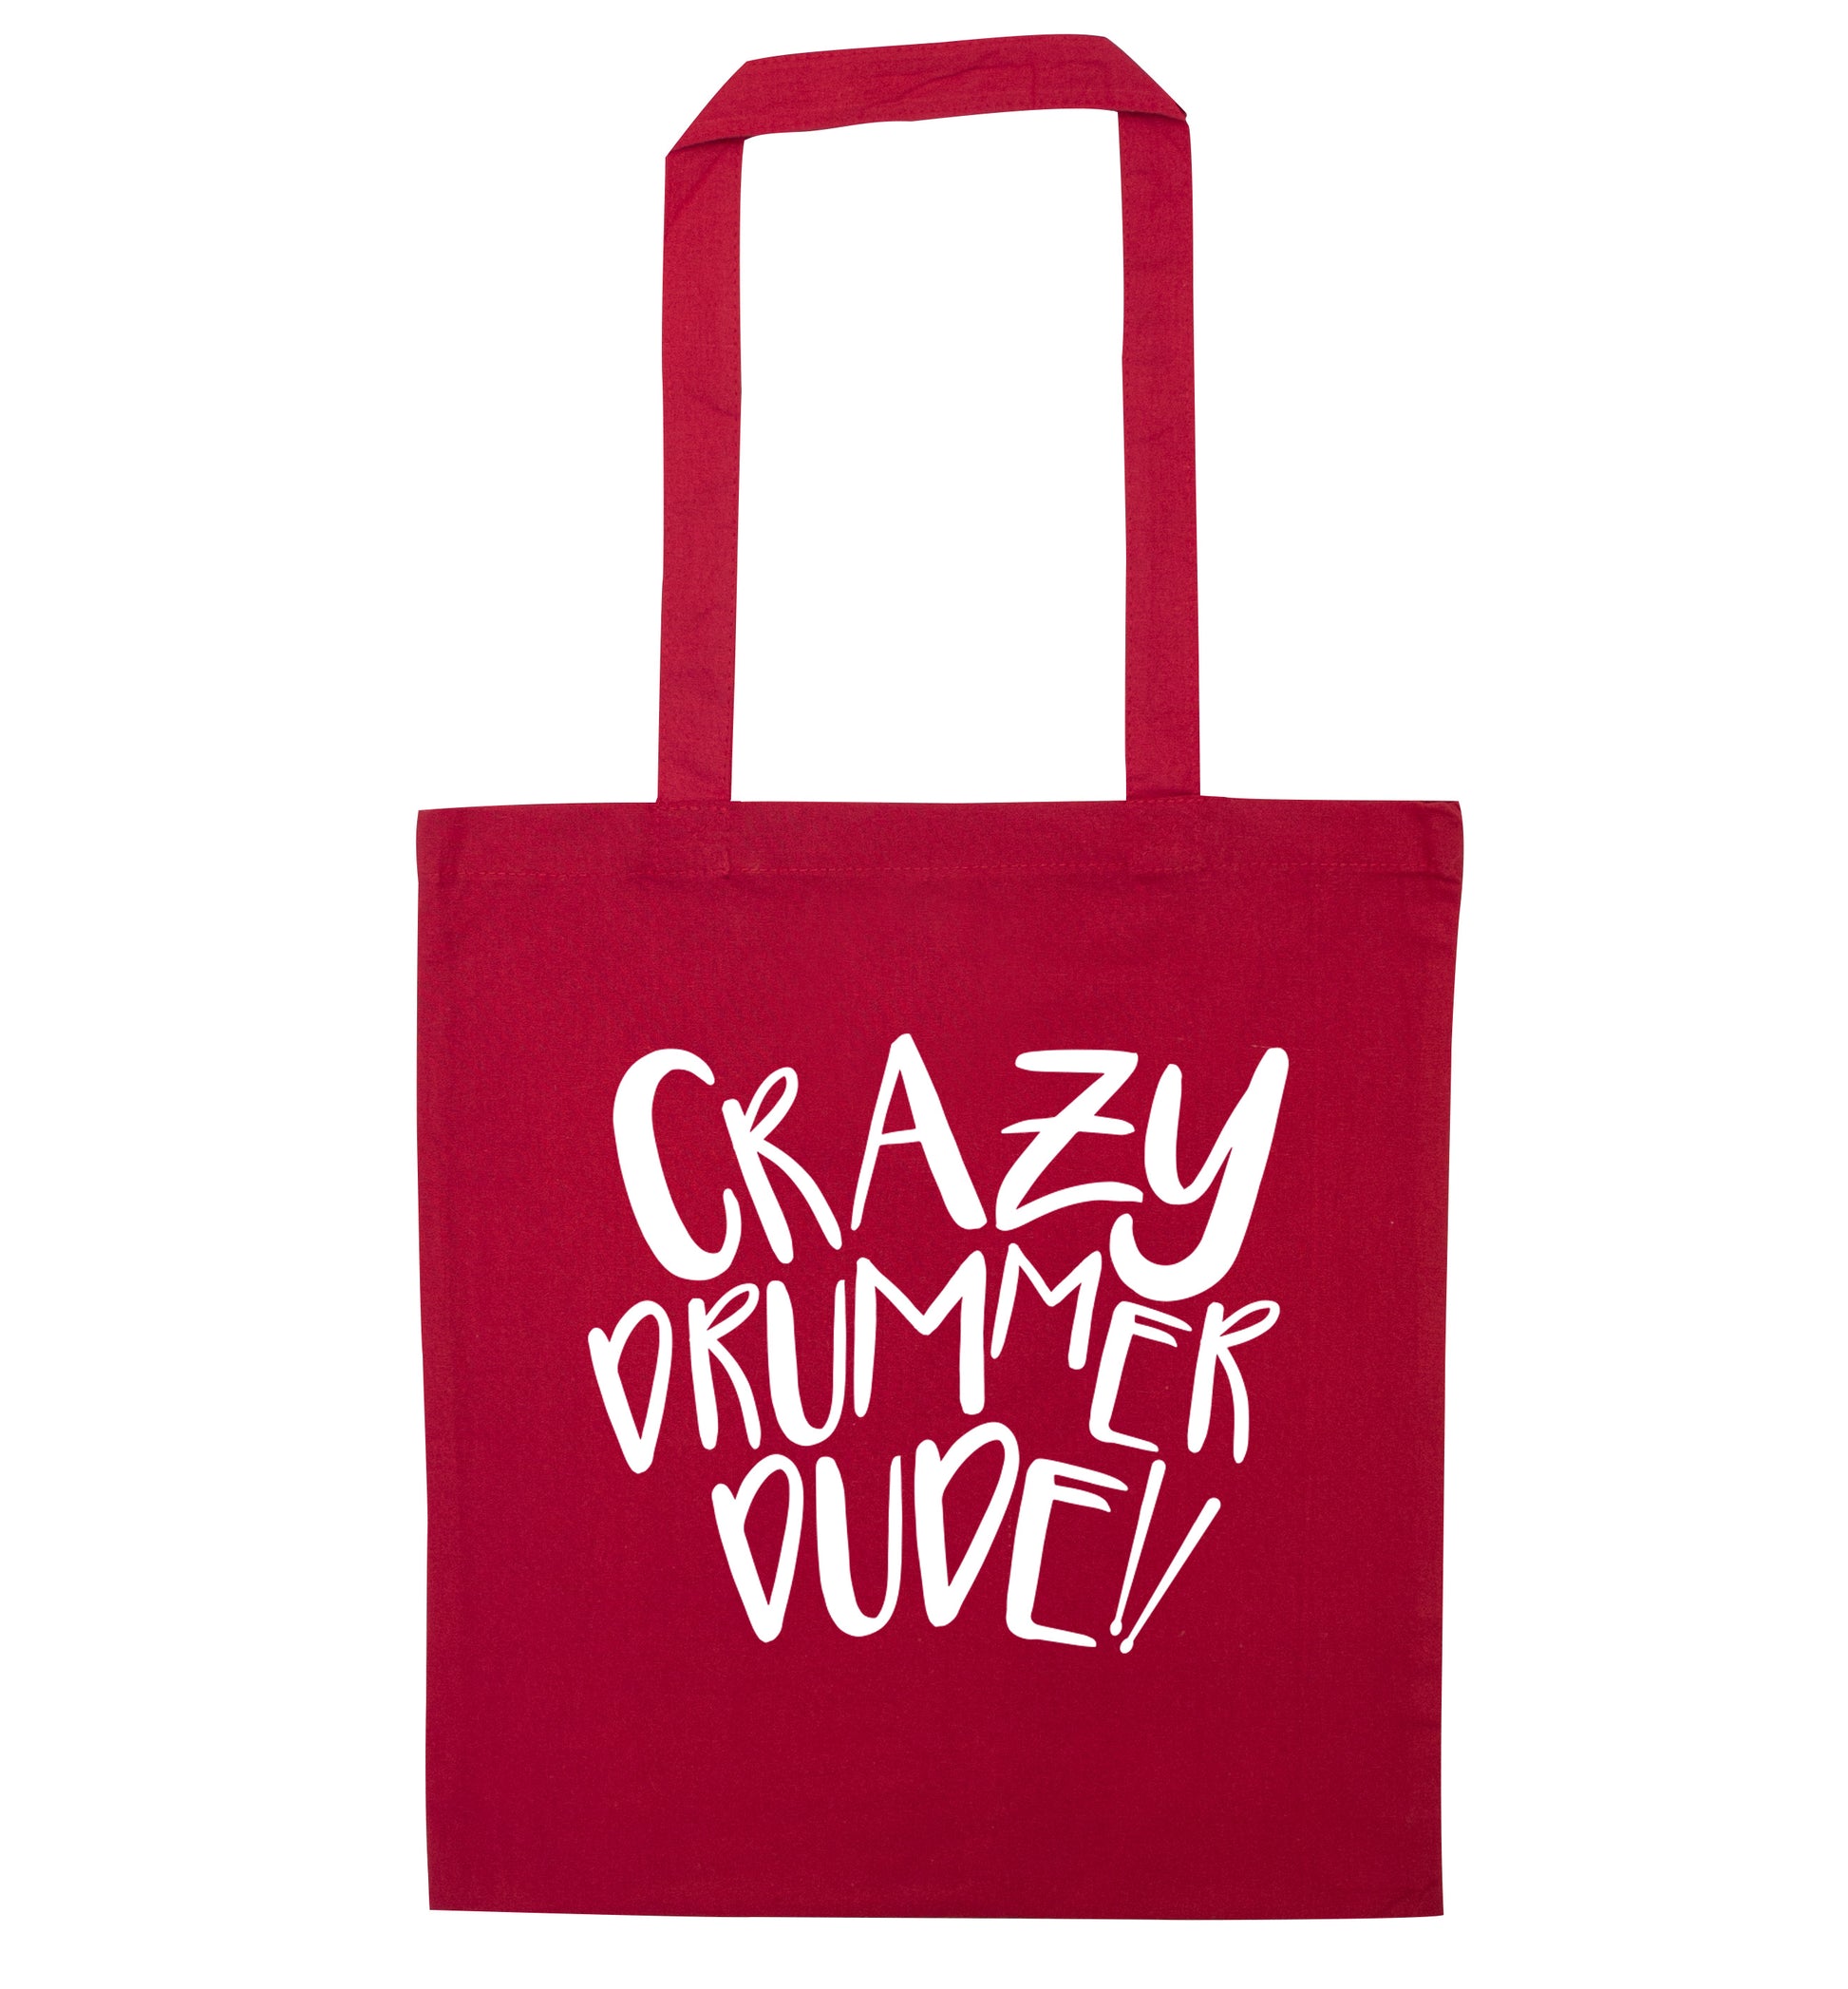 Crazy drummer dude red tote bag